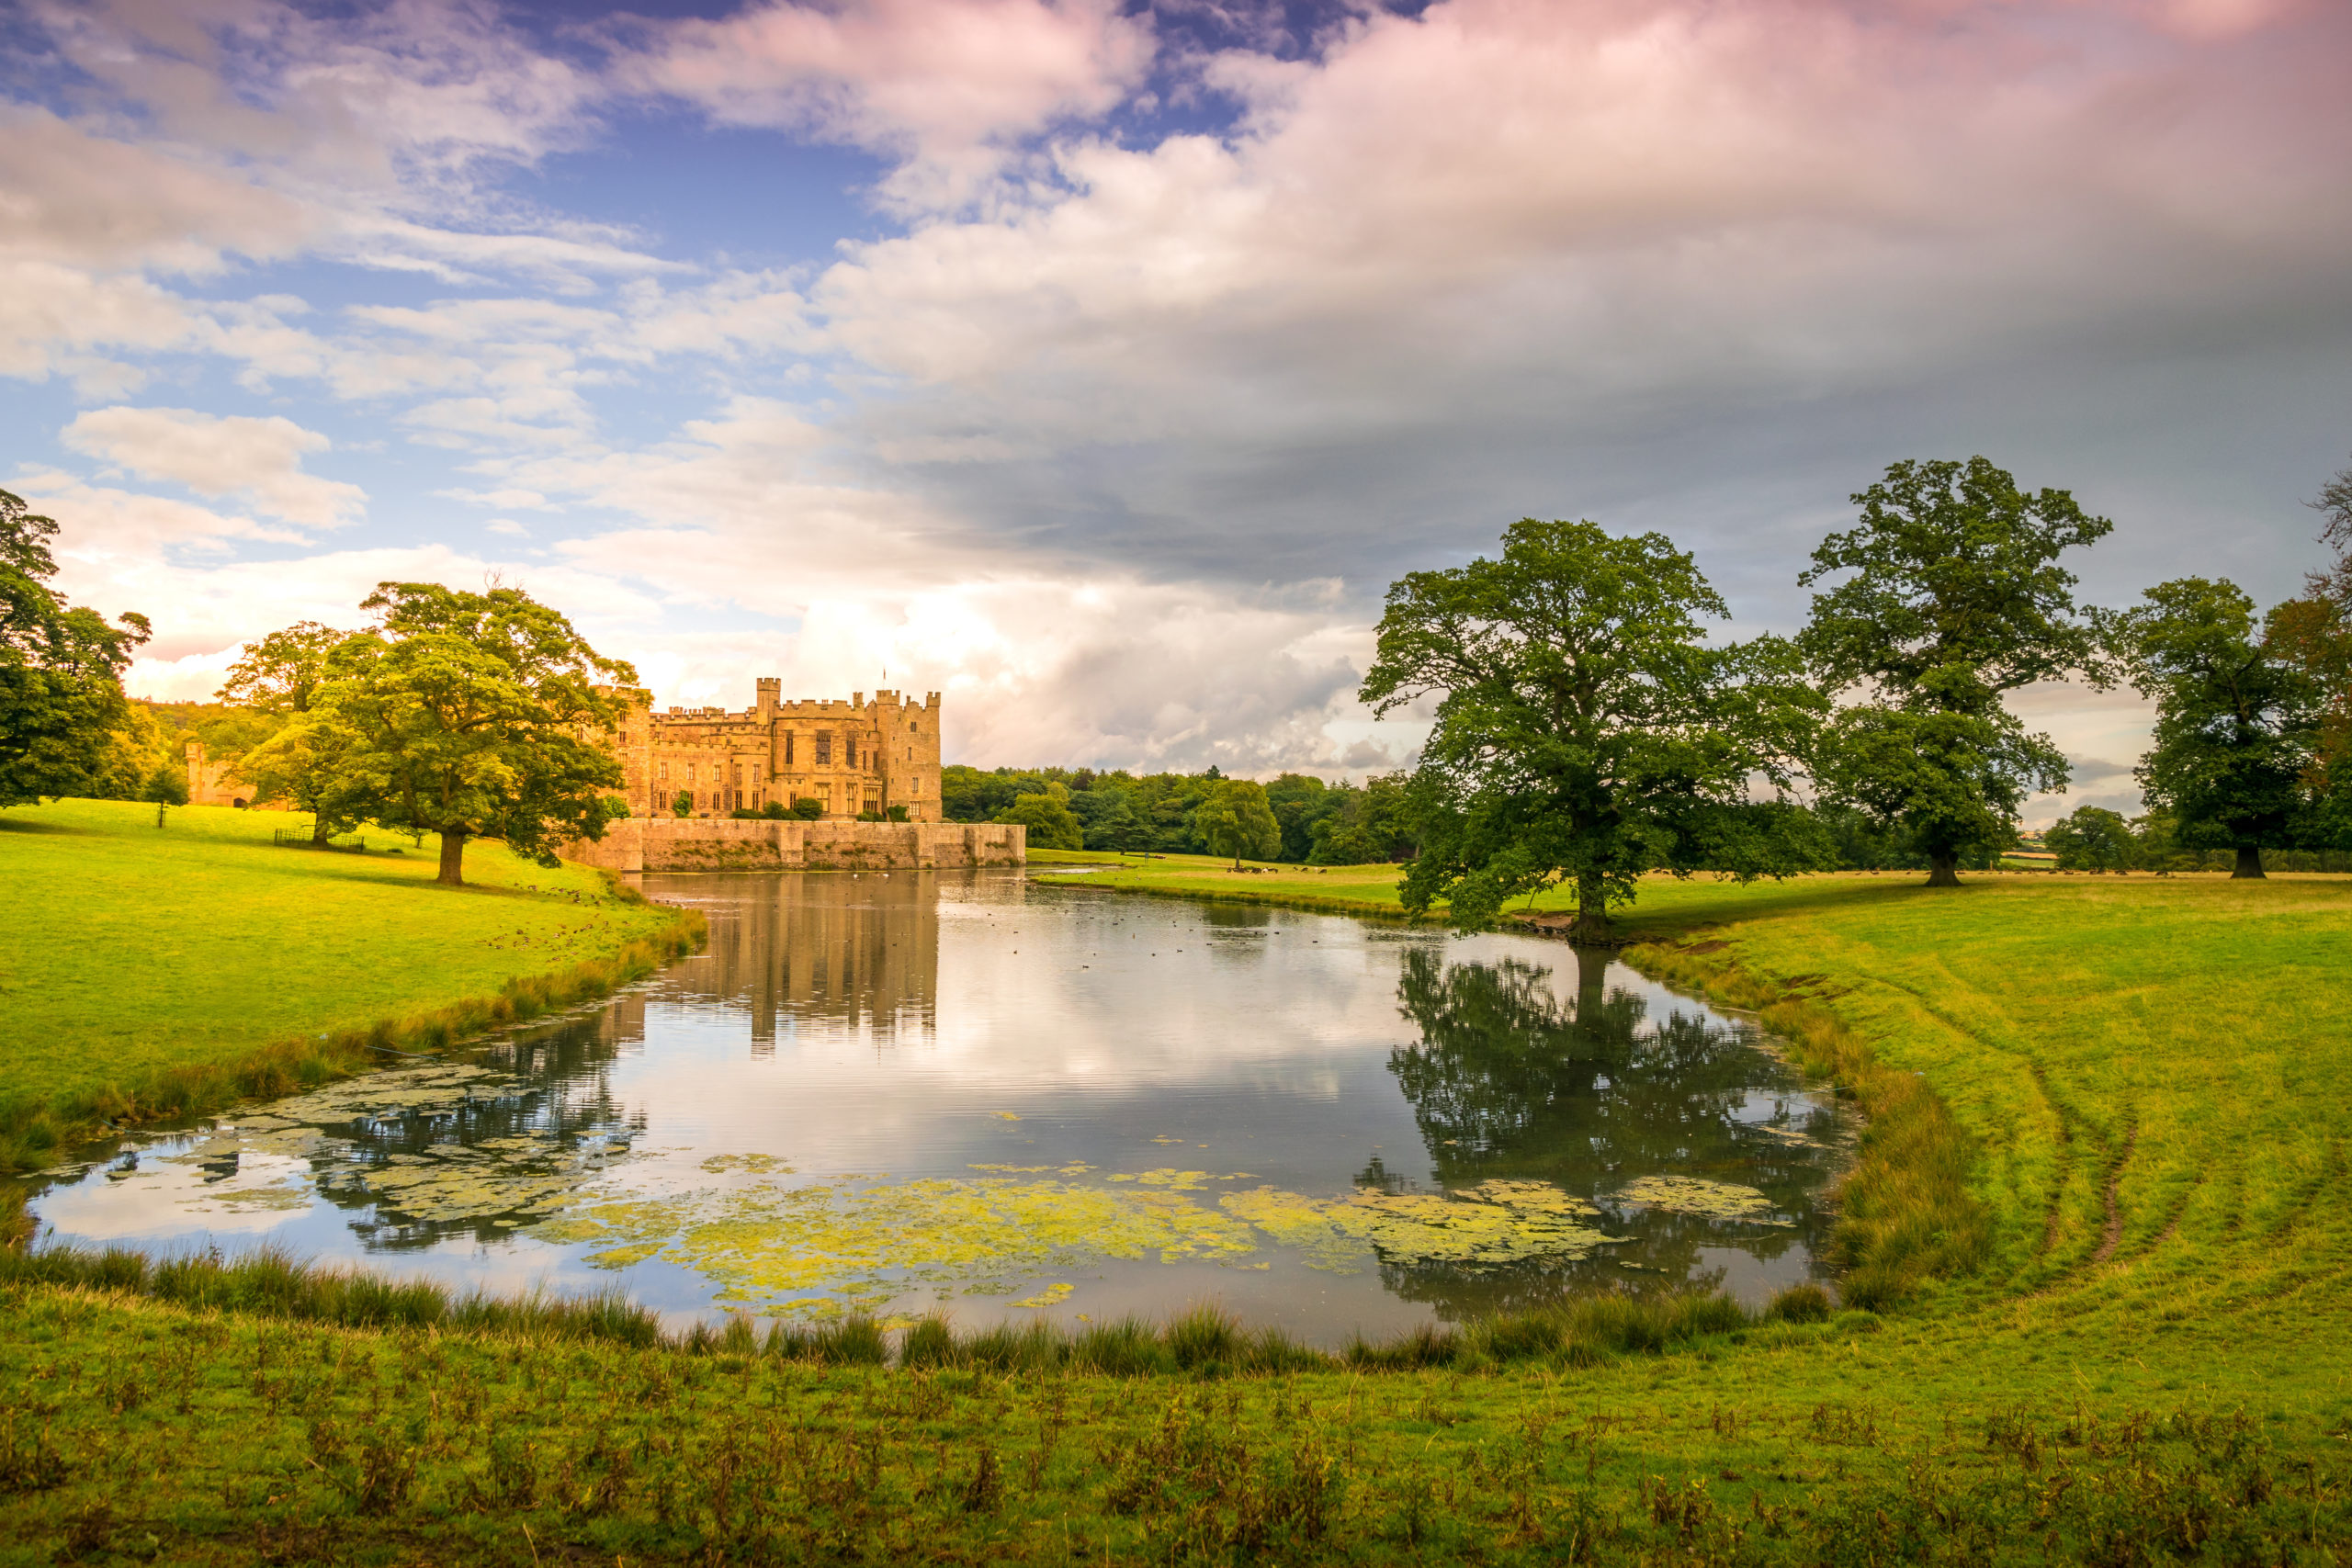 Raby Castle reflected in a pond and a parklike setting.